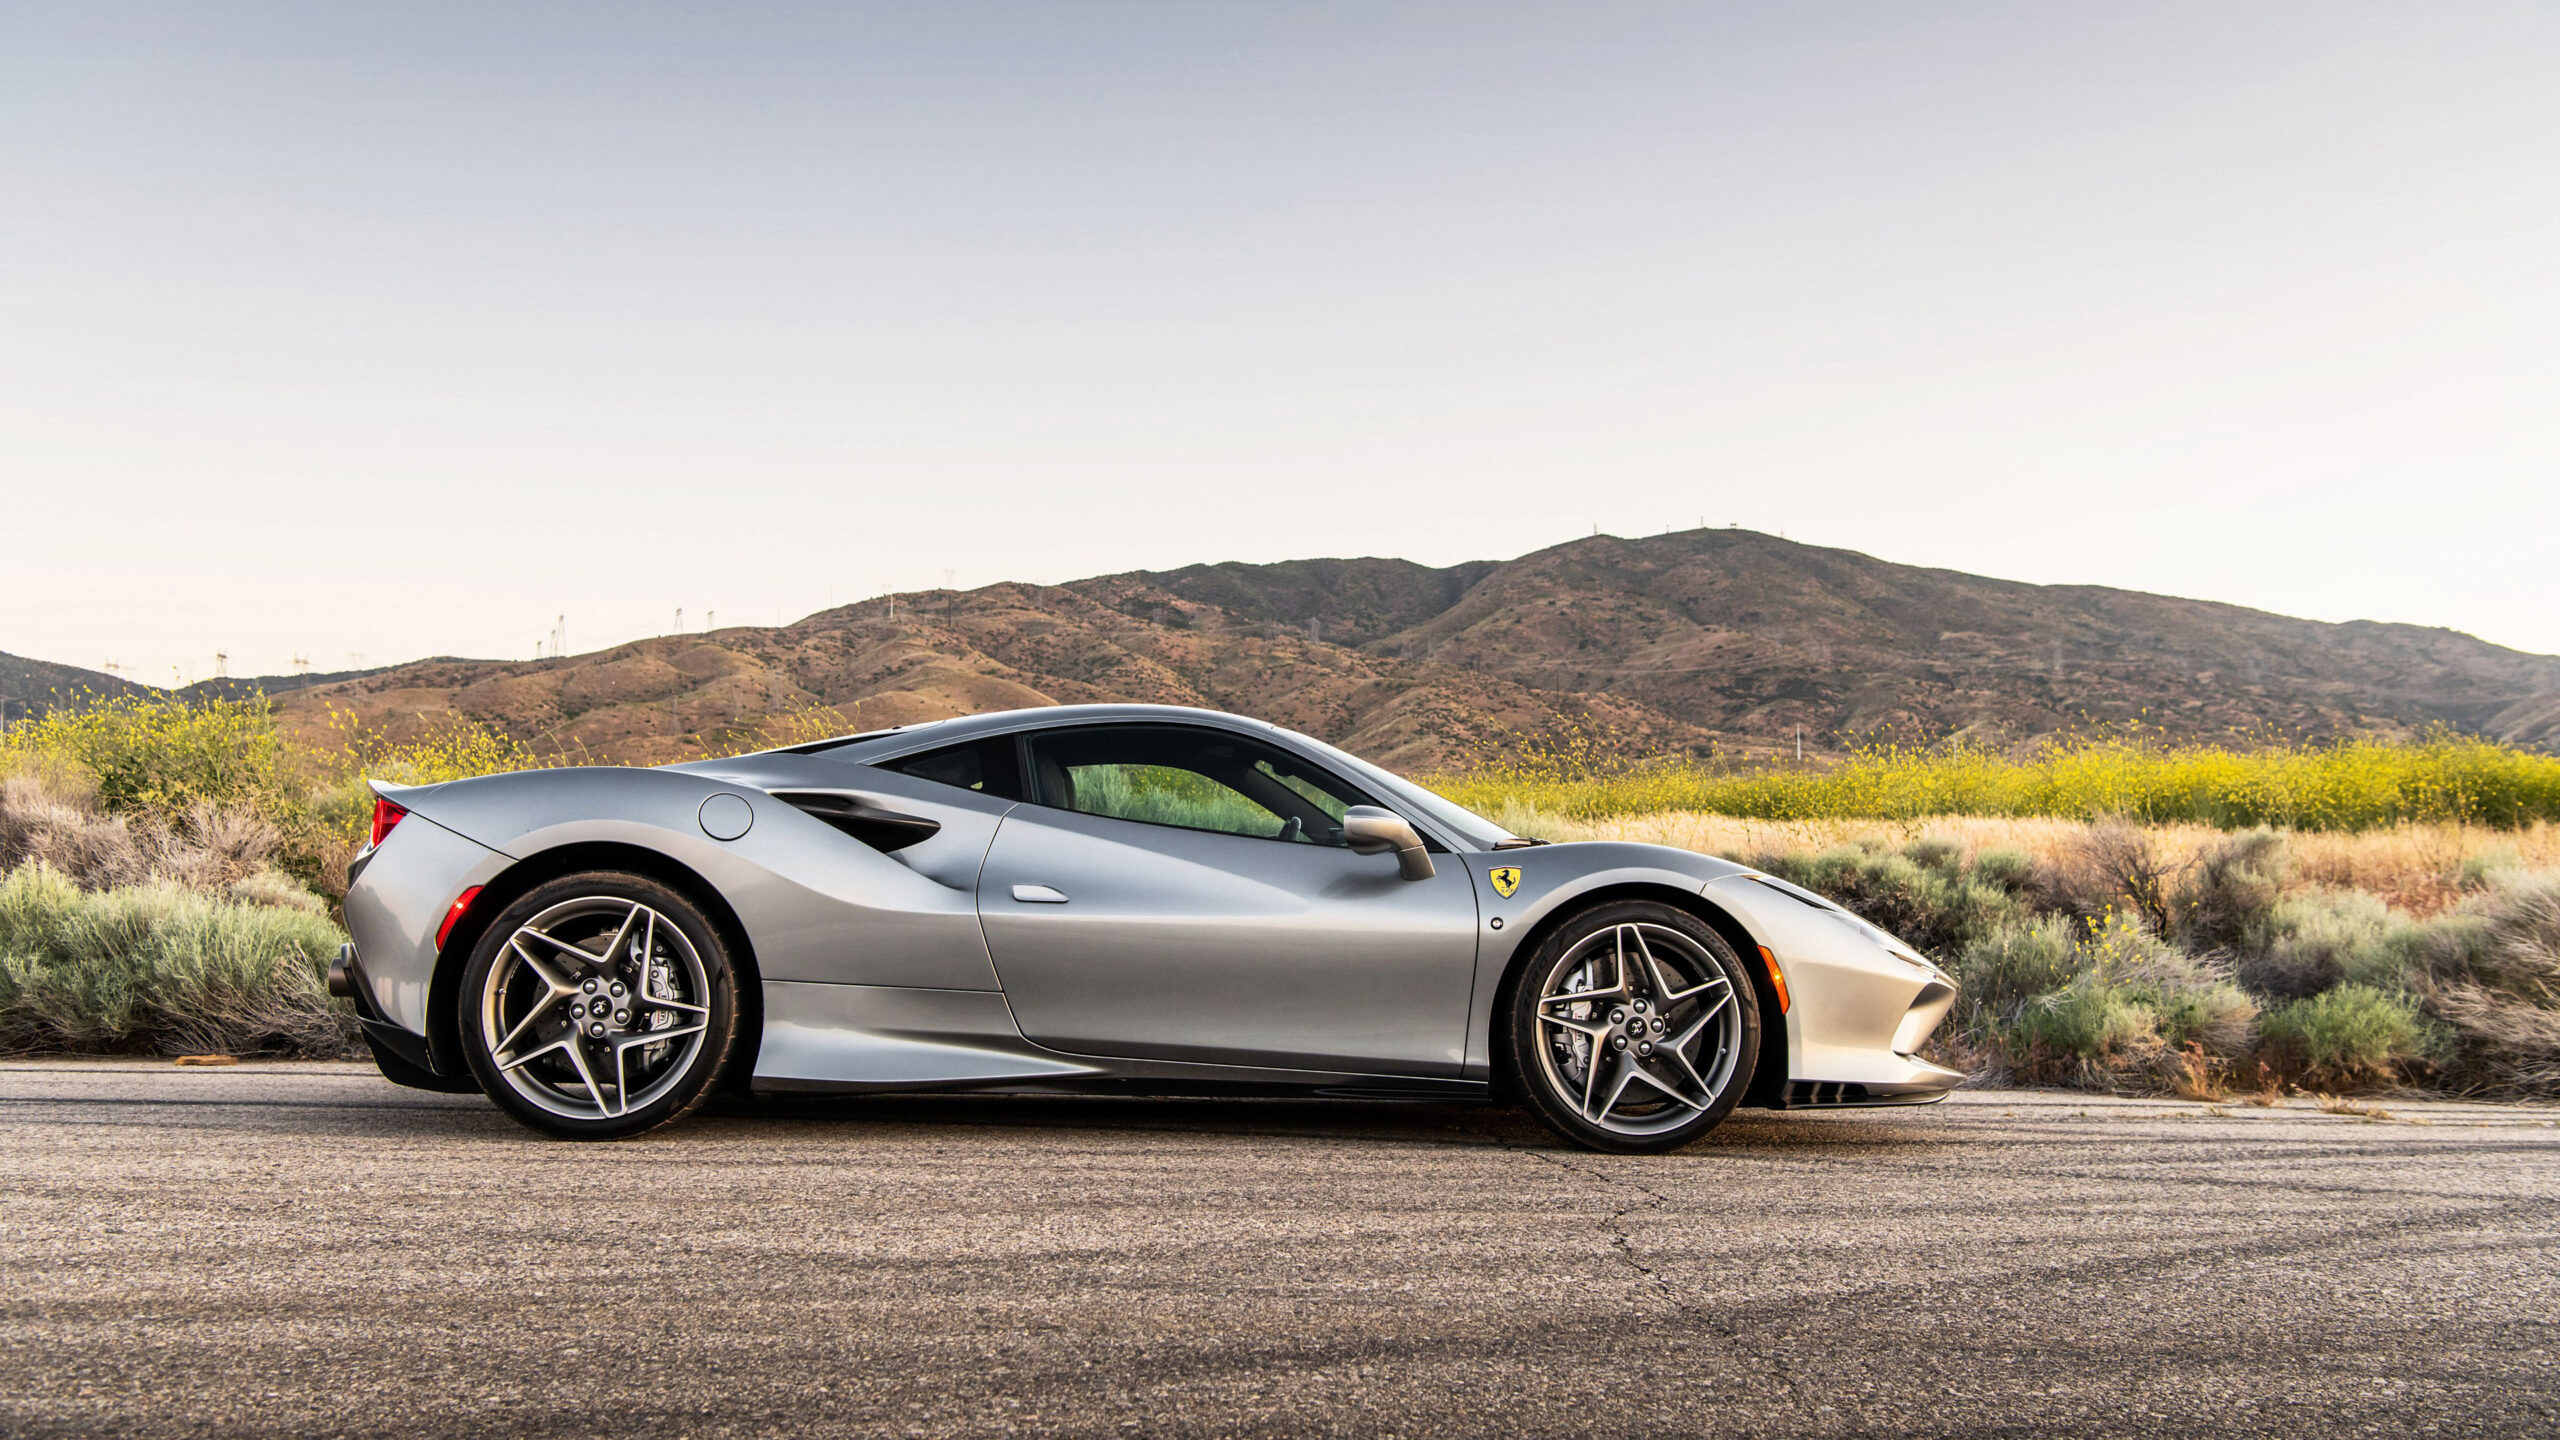 A side view of a silver Ferrari F8 Tributo, in the country.